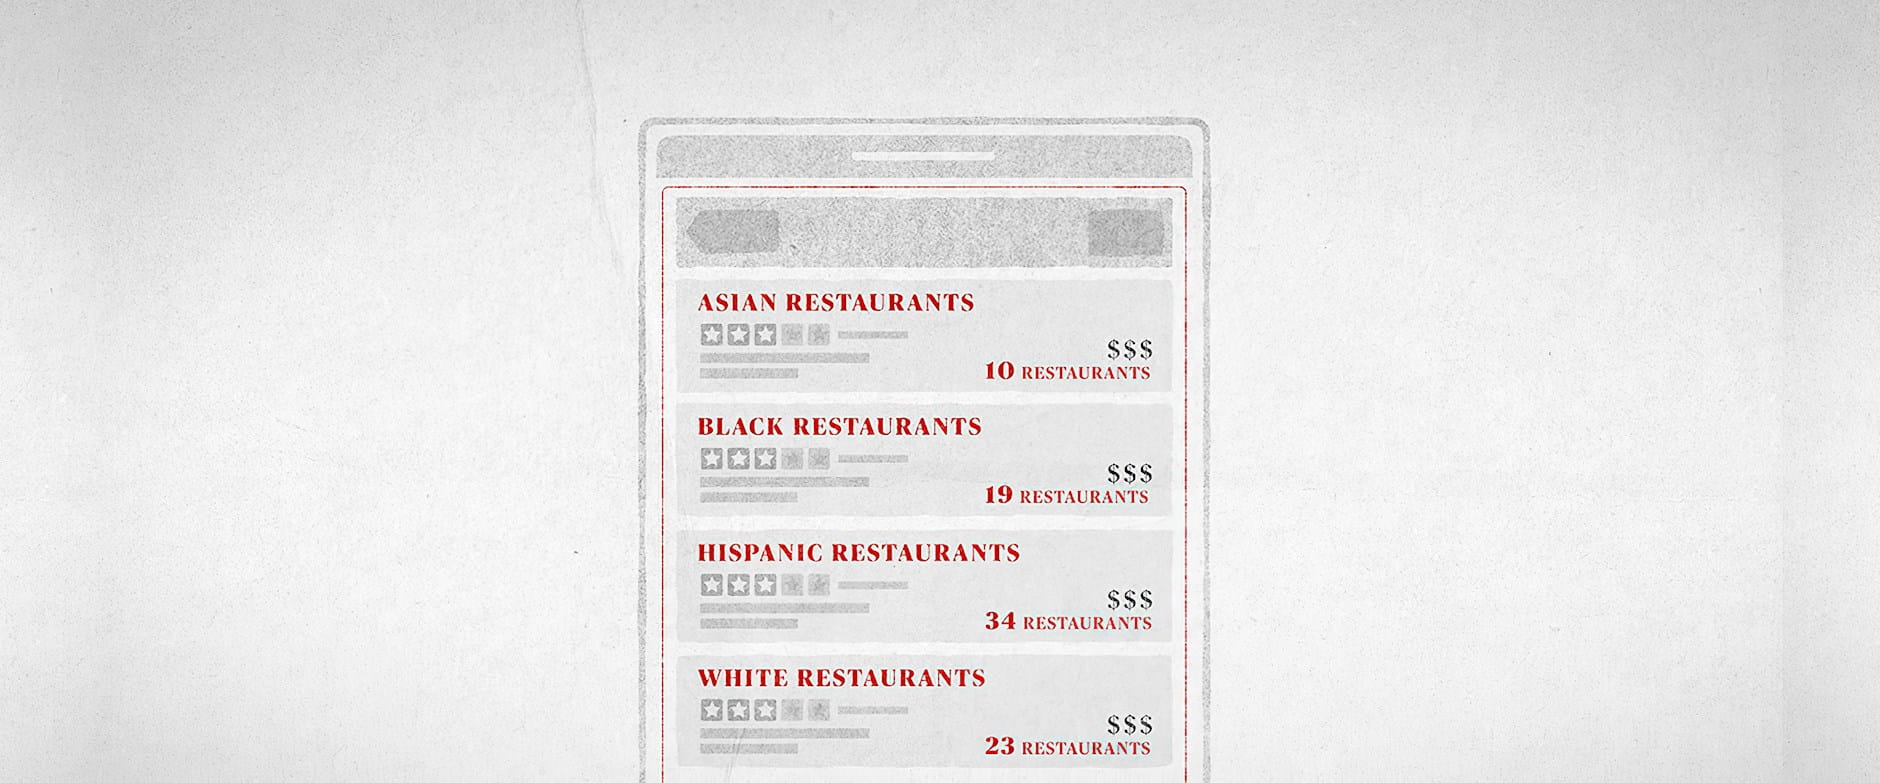 List of restaurants categorized by ethnicity